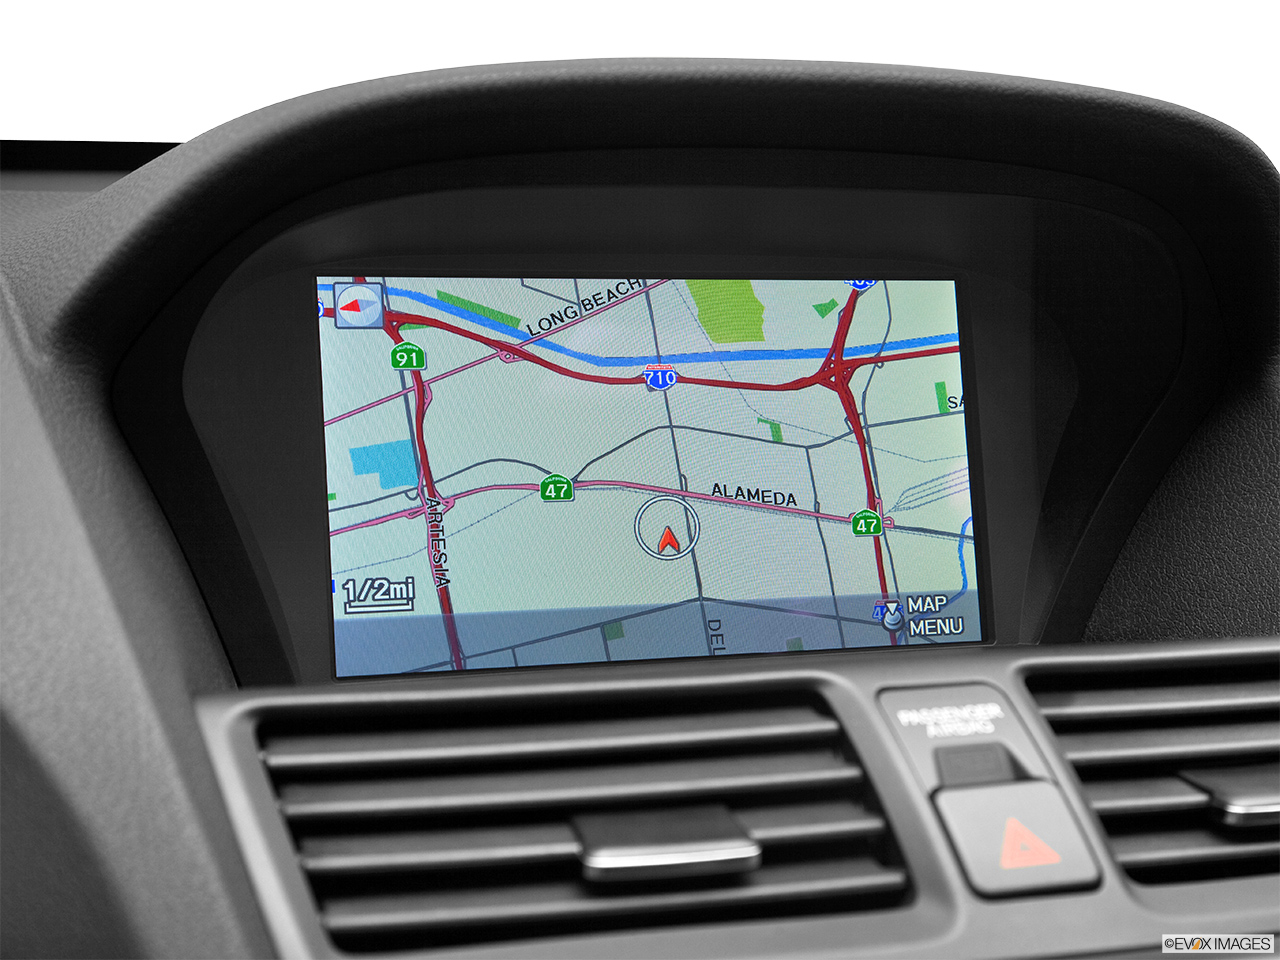 2013 Acura TL SH-AWD Driver position view of navigation system. 